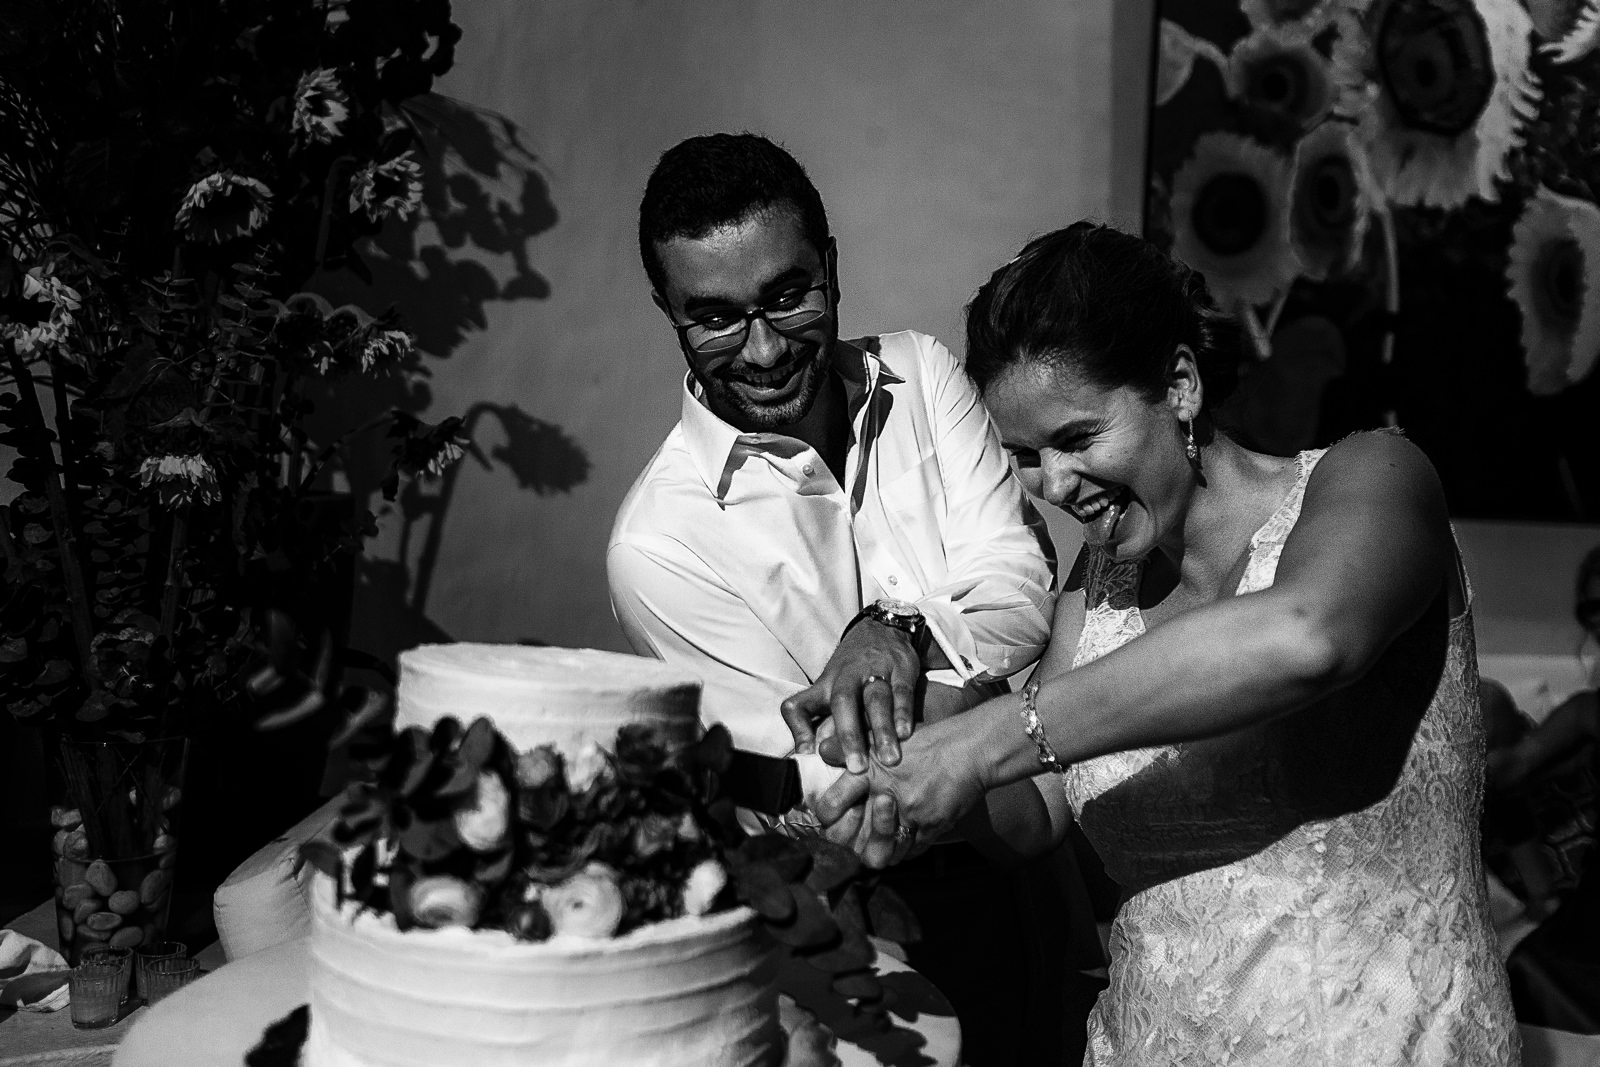 Bride sticking out her tongue as the couple is cutting the cake